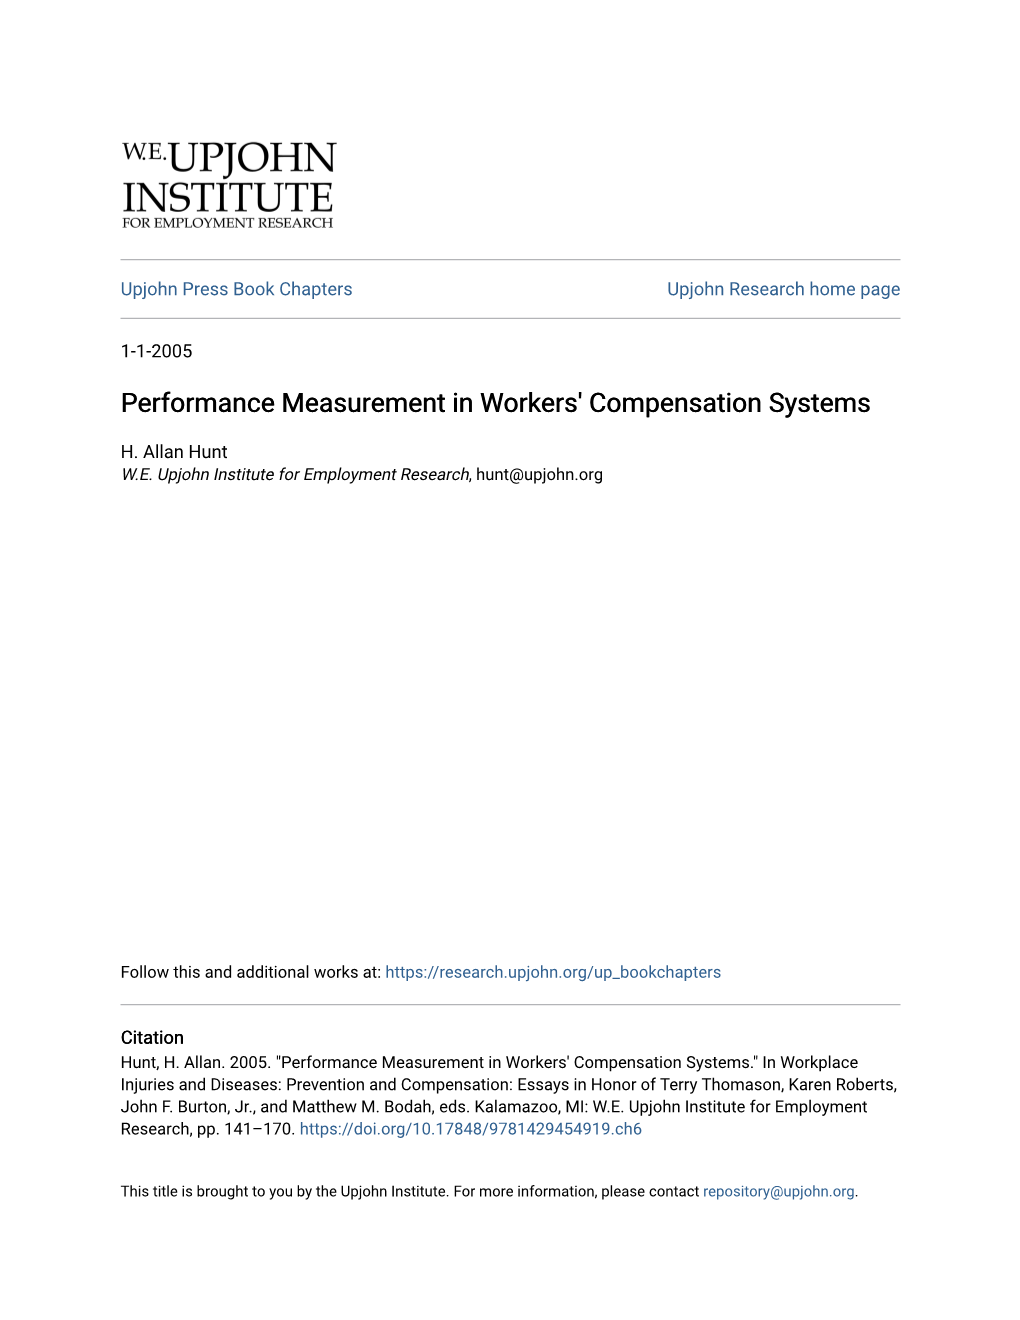 Performance Measurement in Workers' Compensation Systems